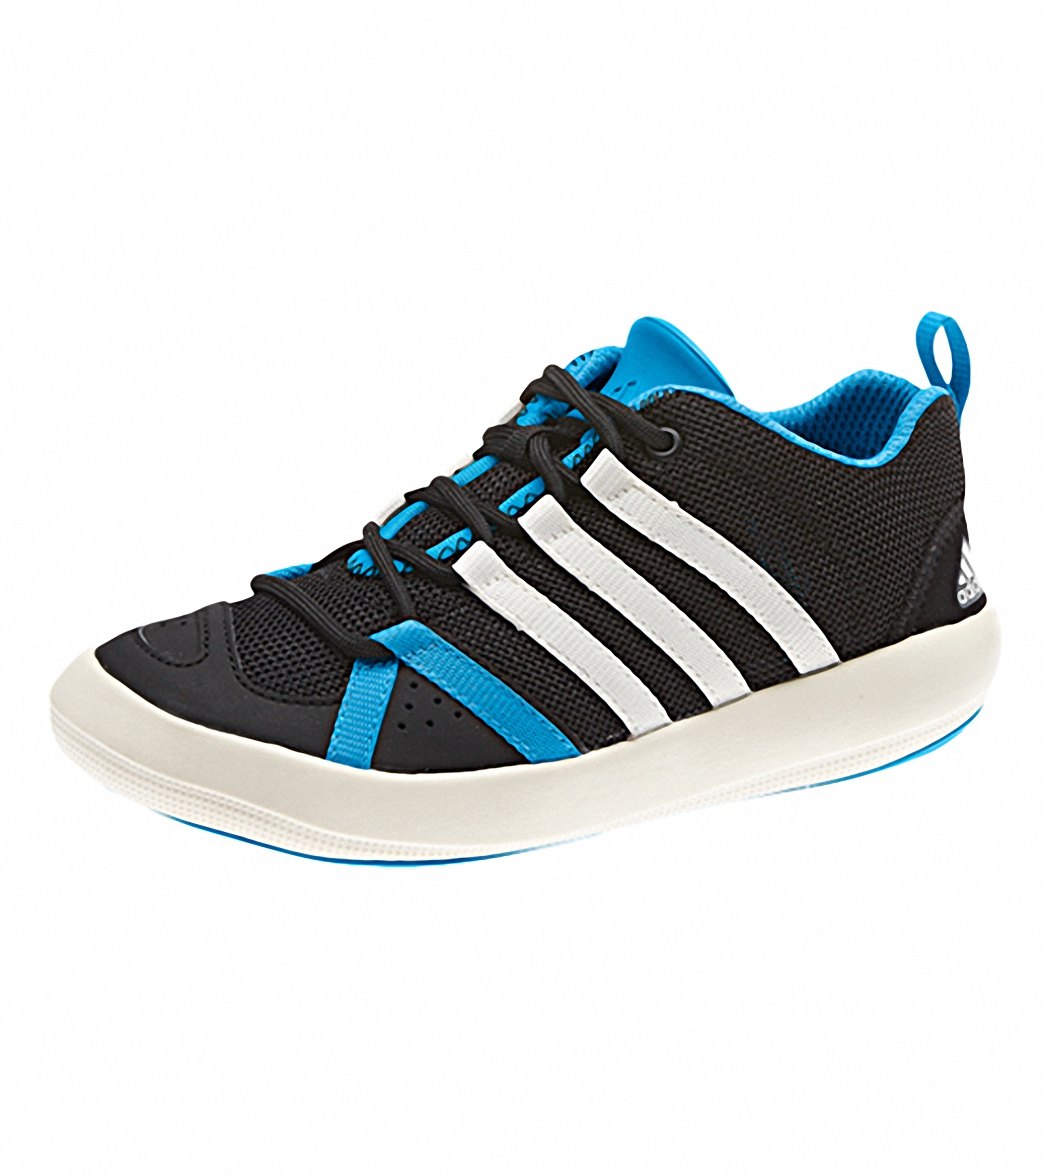 Adidas Boat Lace Shoes at SwimOutlet.com